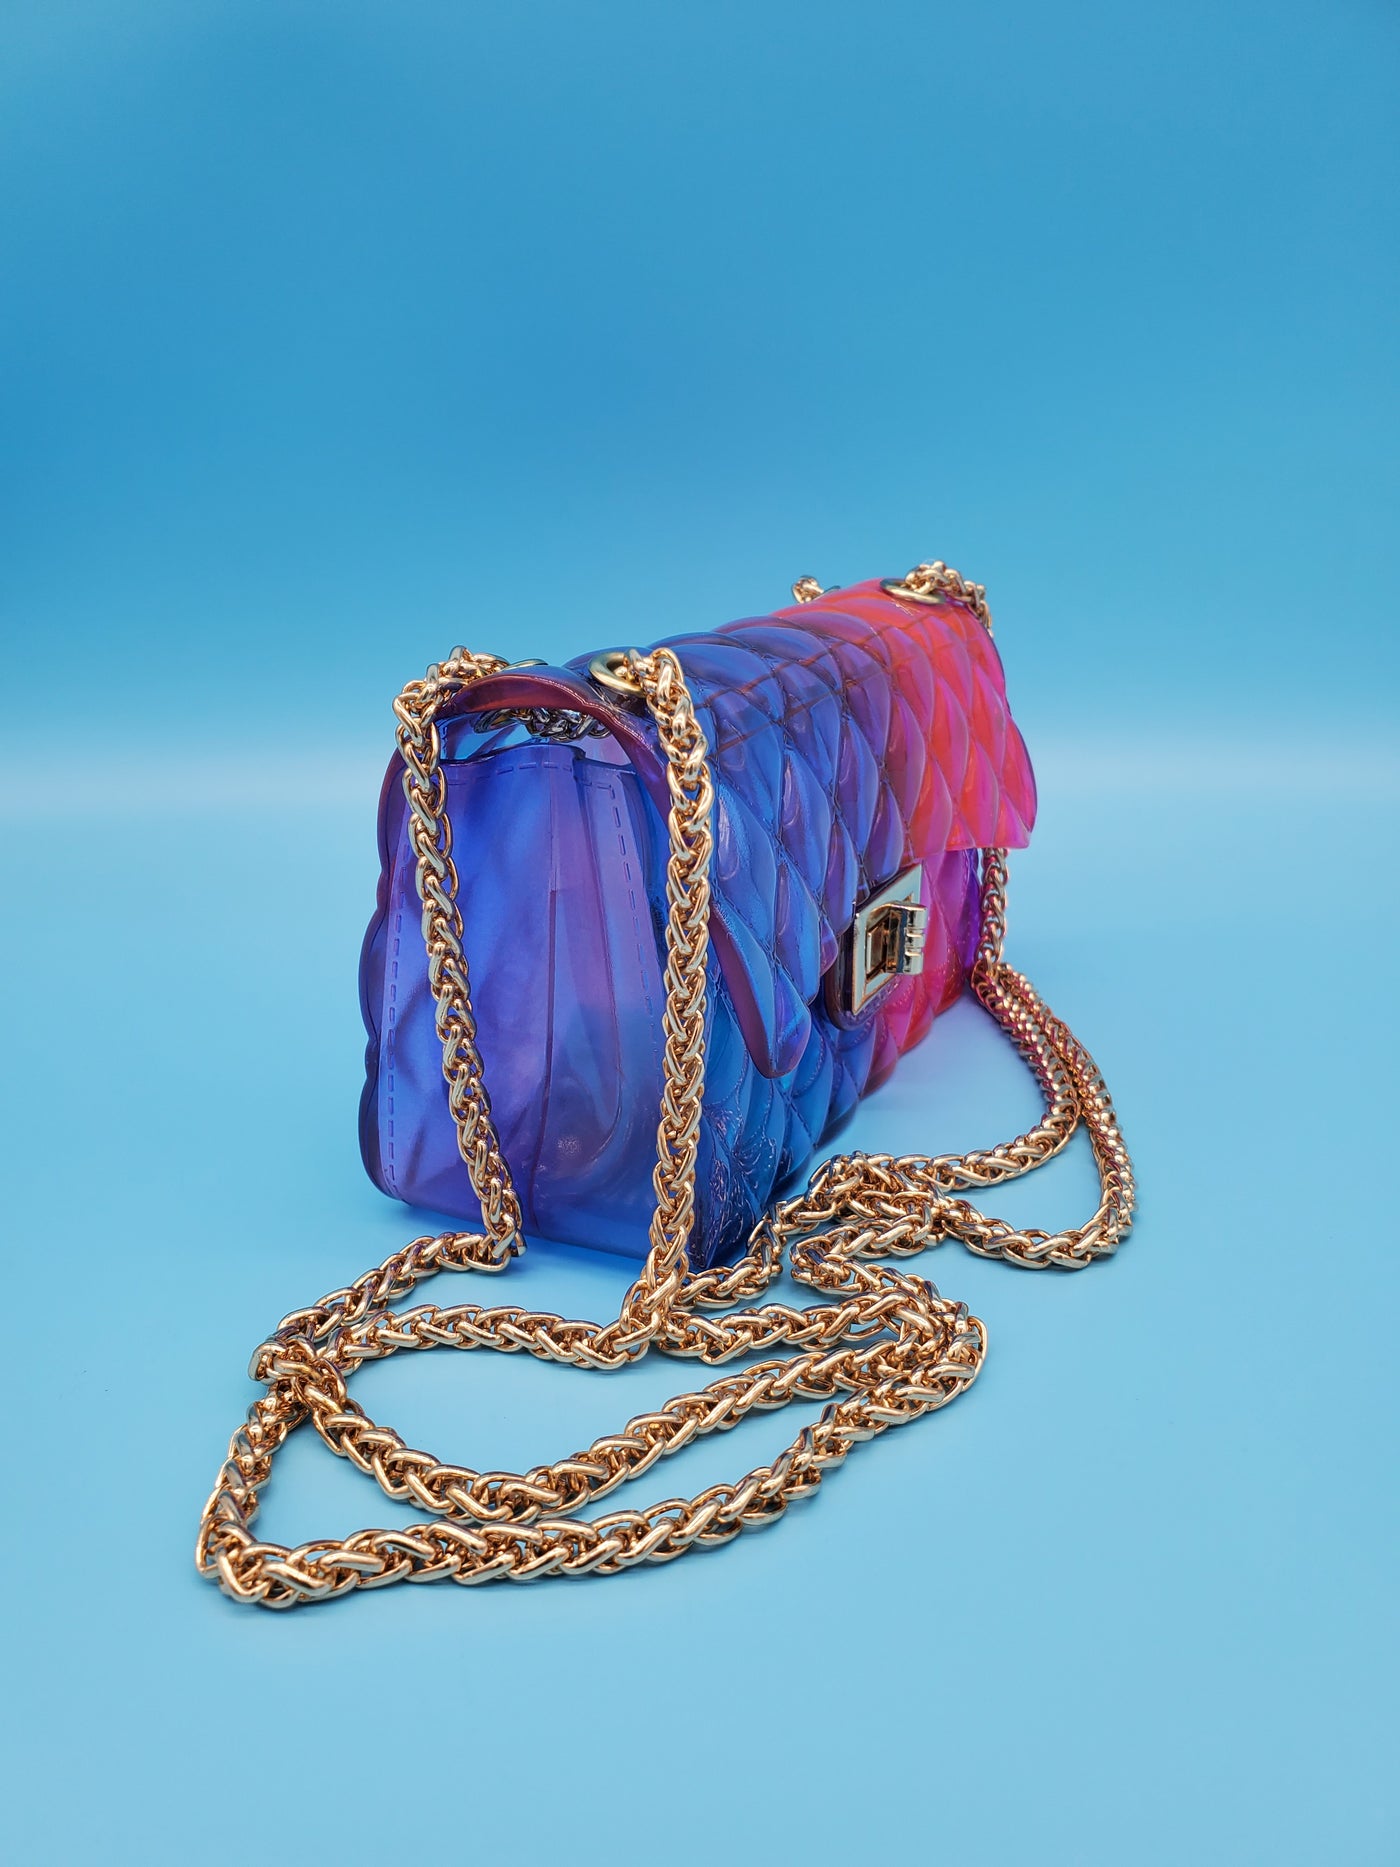 Mini Jelly Bag With A Gold Chain